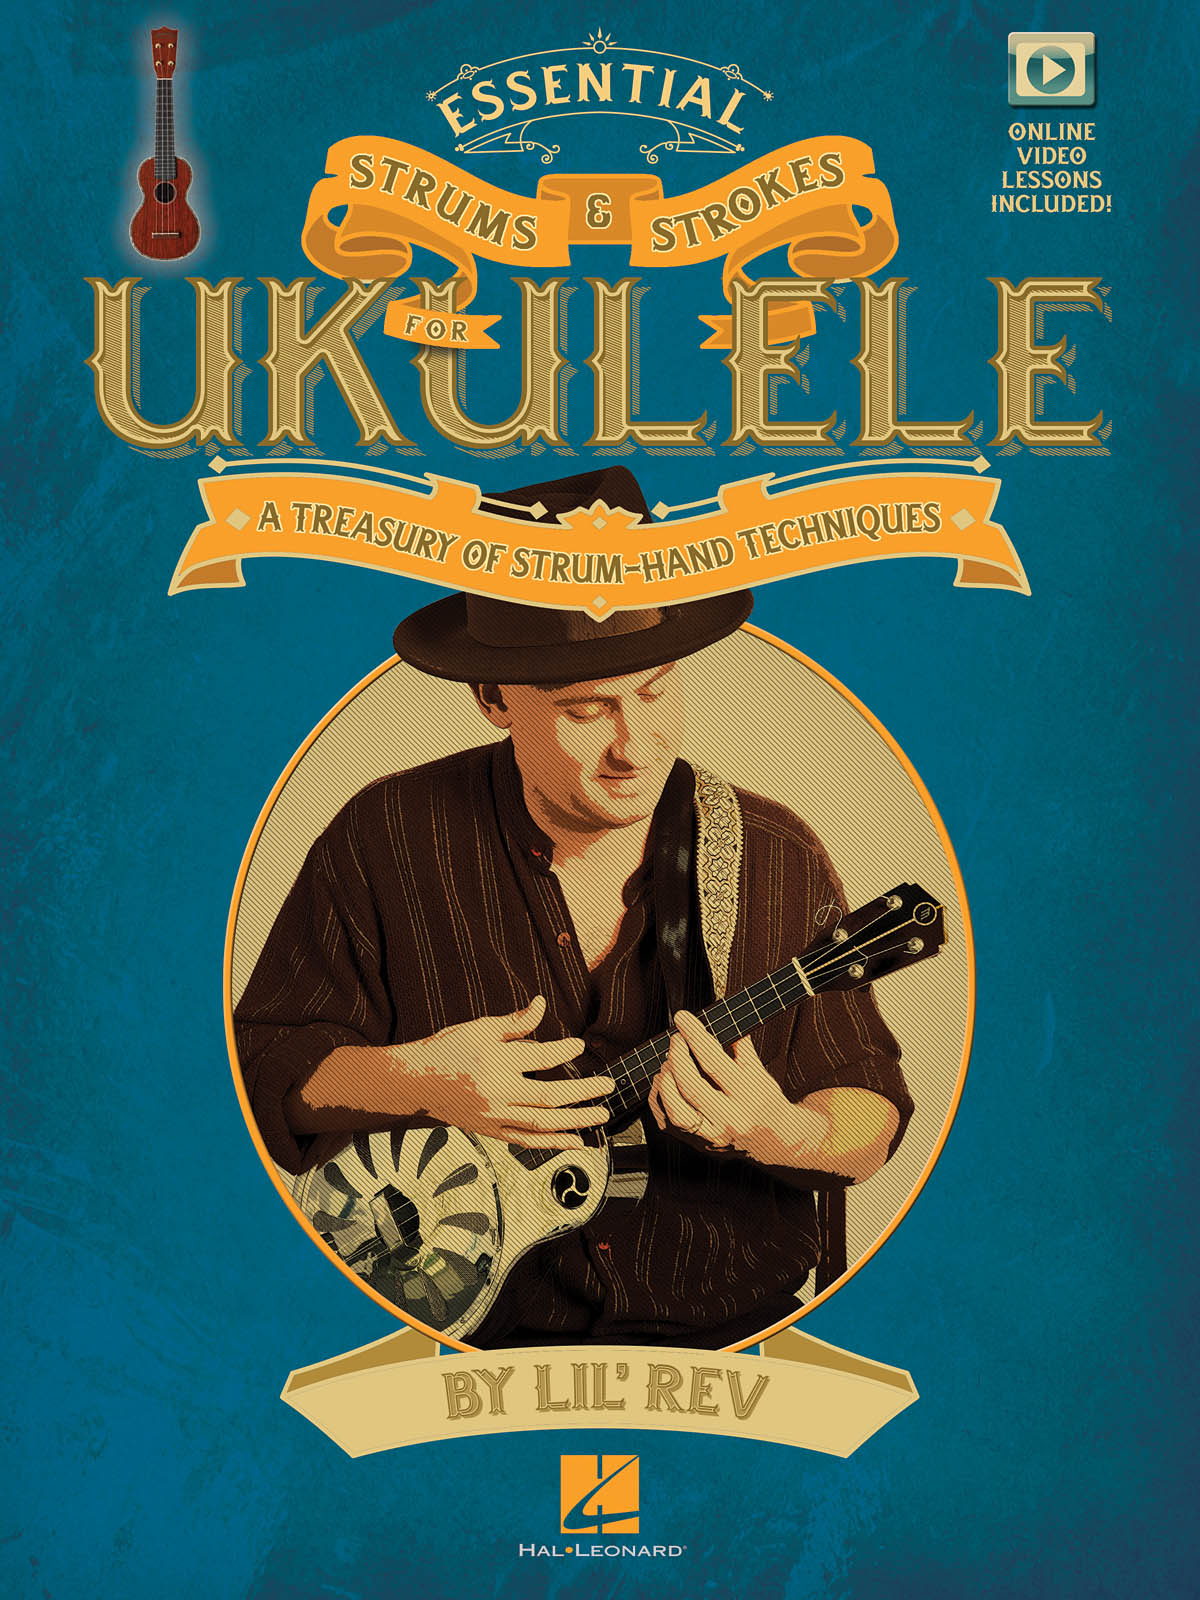 Essential Strums & Strokes for Ukulele - A Treasury of Strum-Hand Techniques - noty pro ukulele